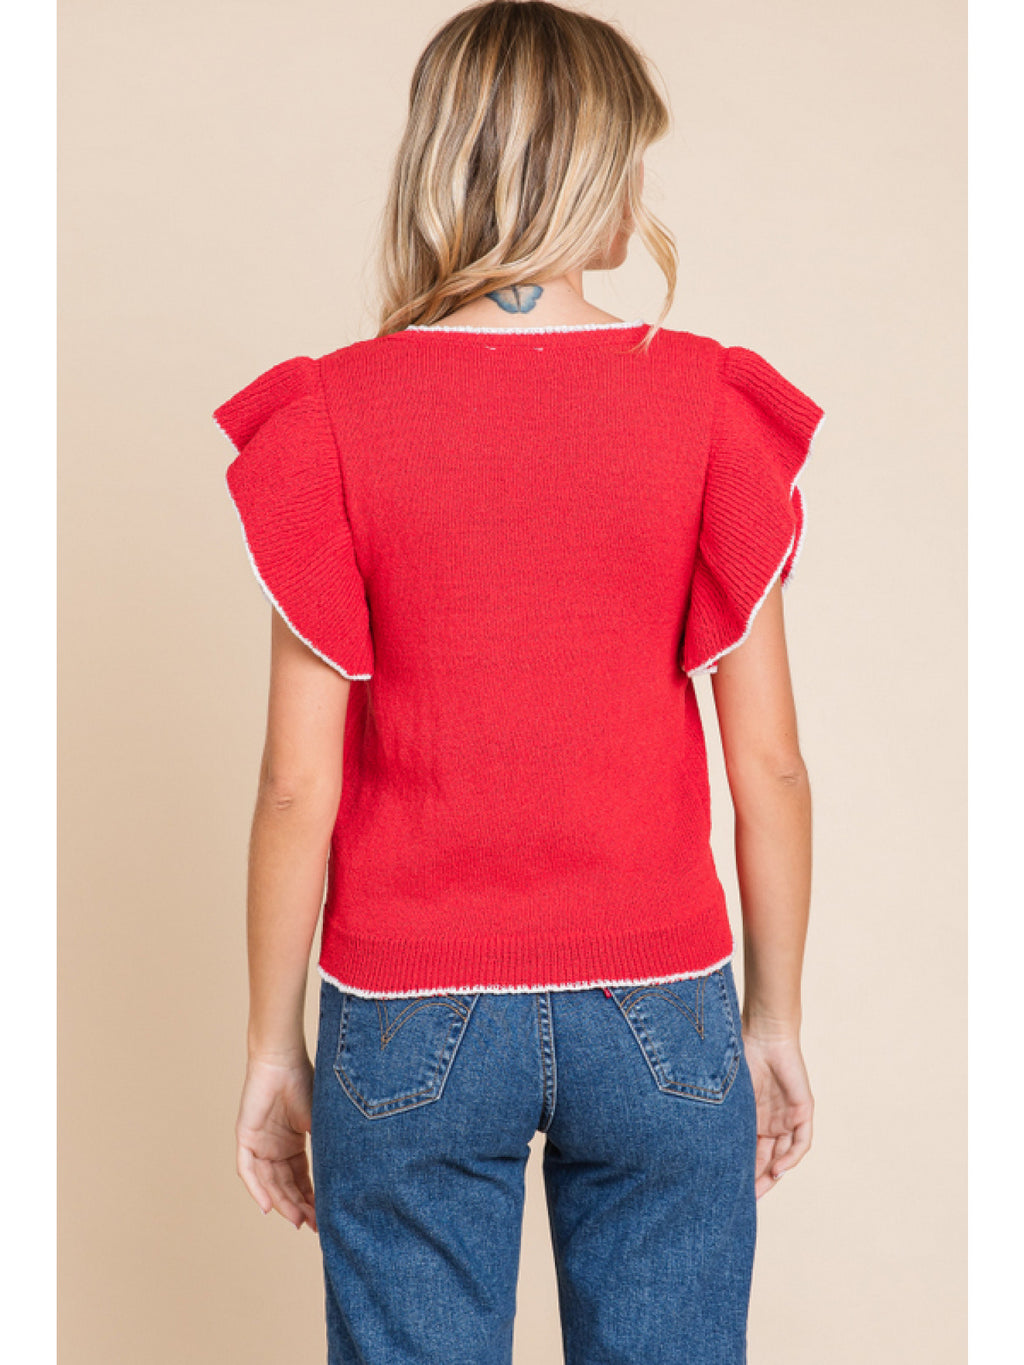 Red Summer Knit Top